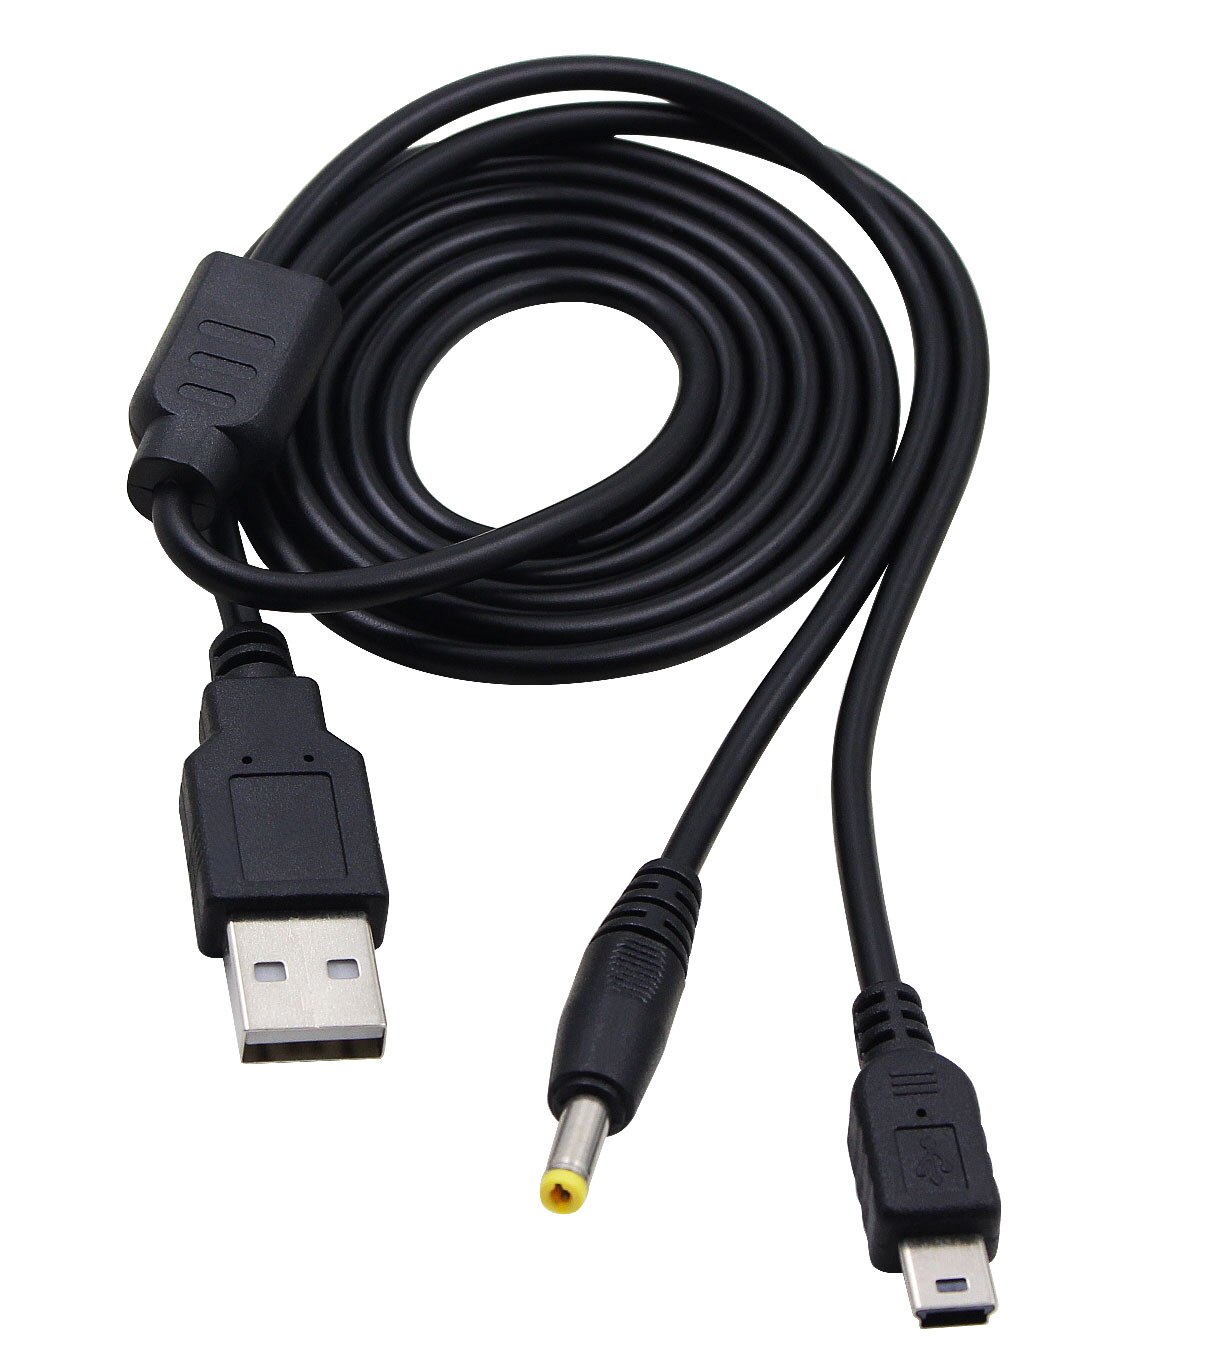 2 In 1 Usb Data Transfer Sync Charger Cable Koord Voor Sony Psp 2000 3000 Ps Vita